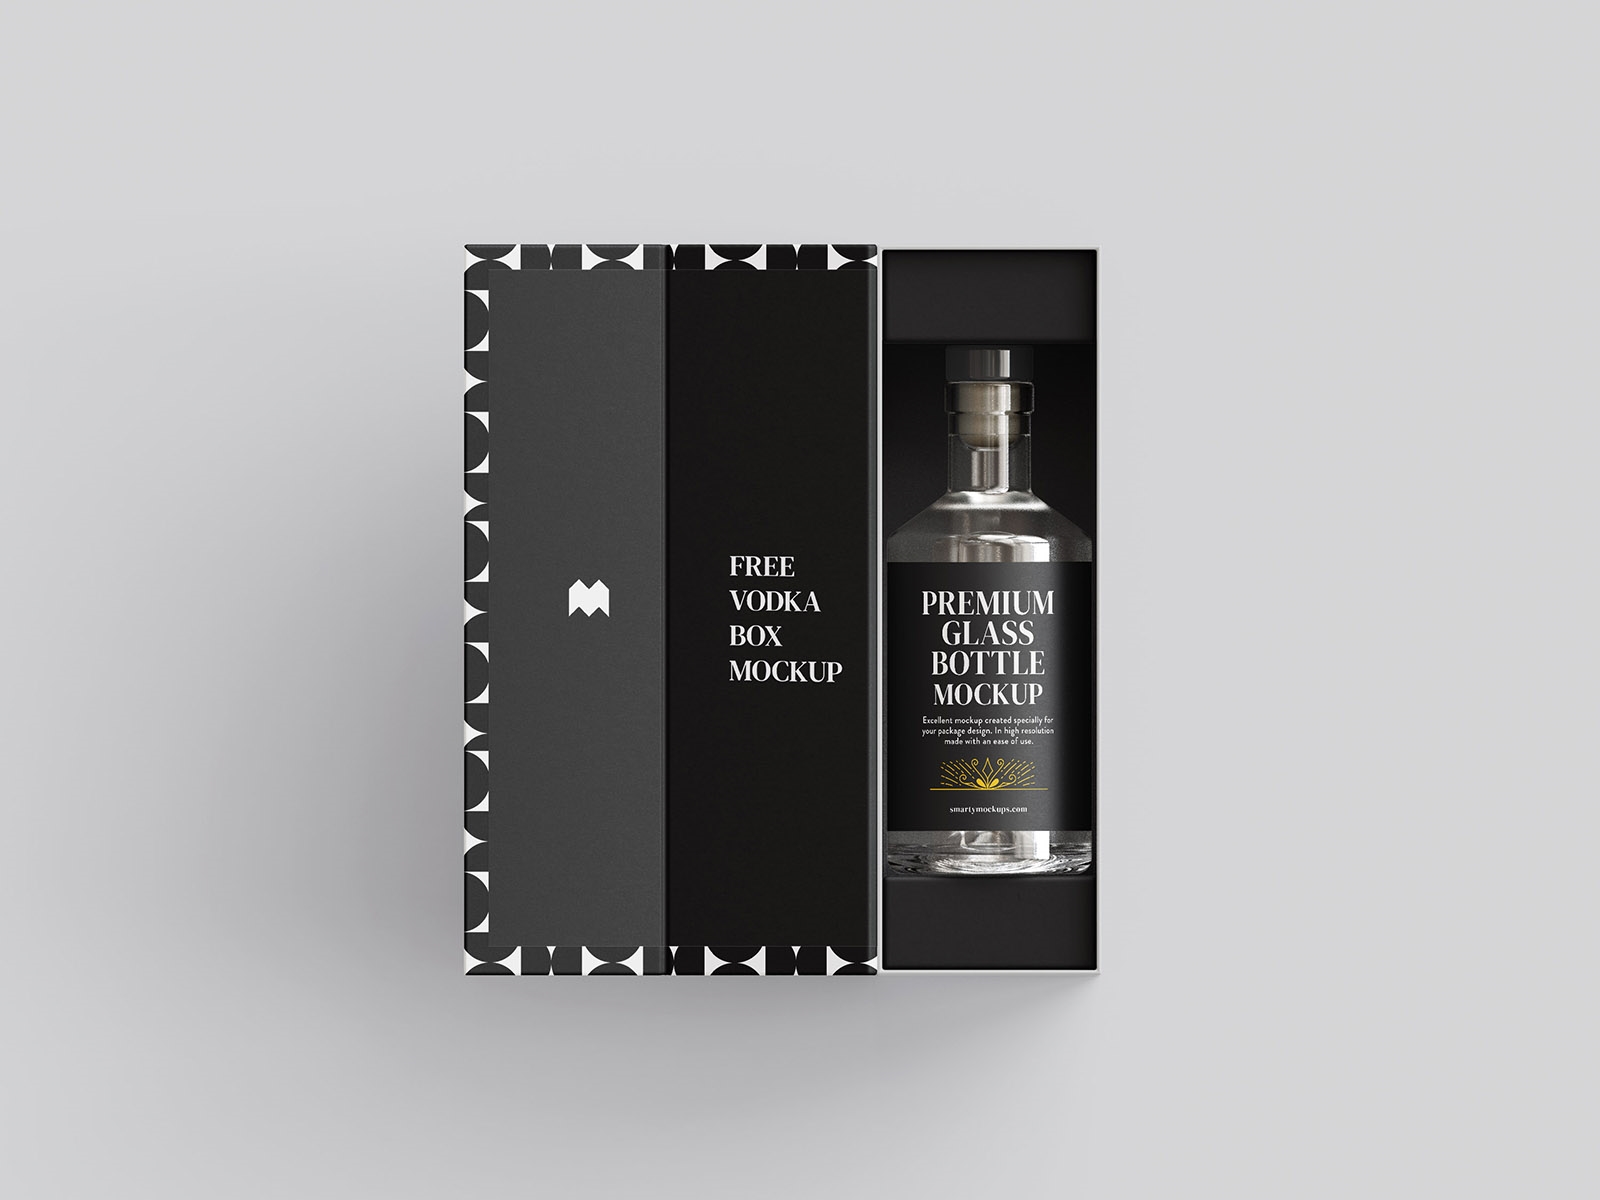 Perspective and Front View of 5 Vodka Bottle and Packaging Mockups FREE PSD